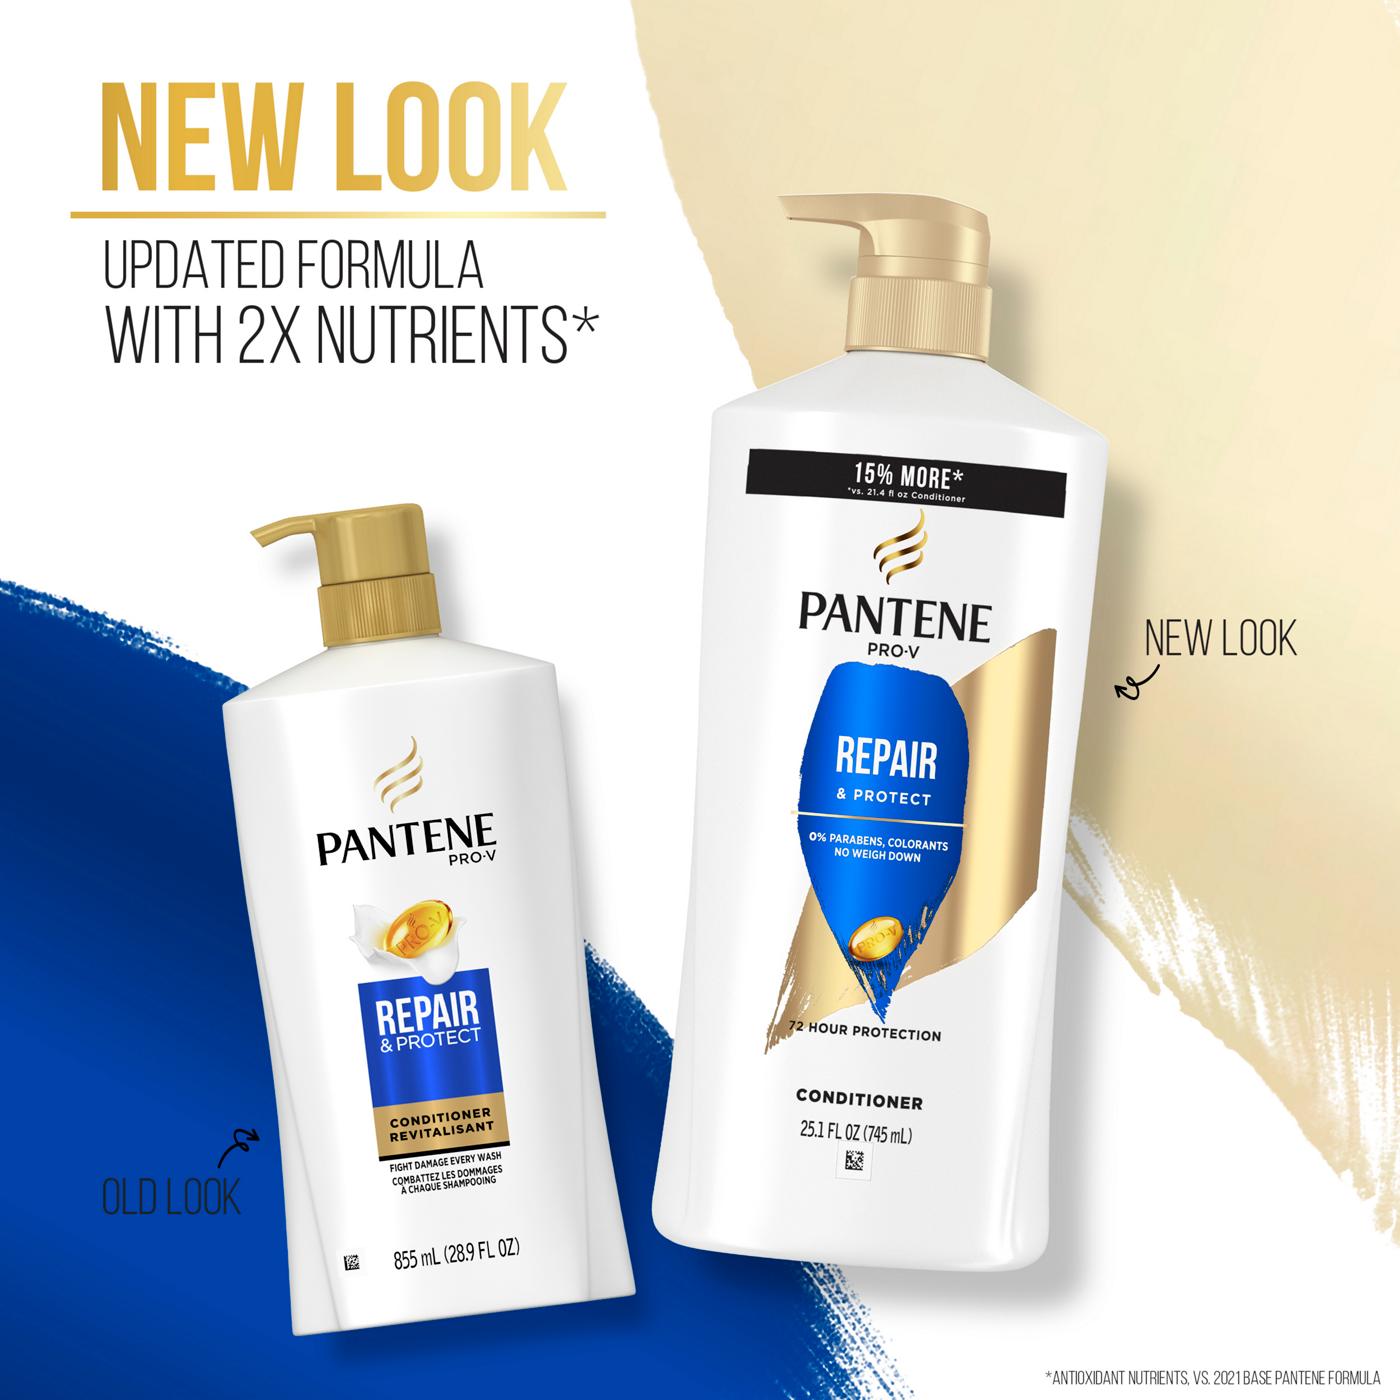 Pantene PRO-V Repair & Protect Conditioner; image 6 of 9